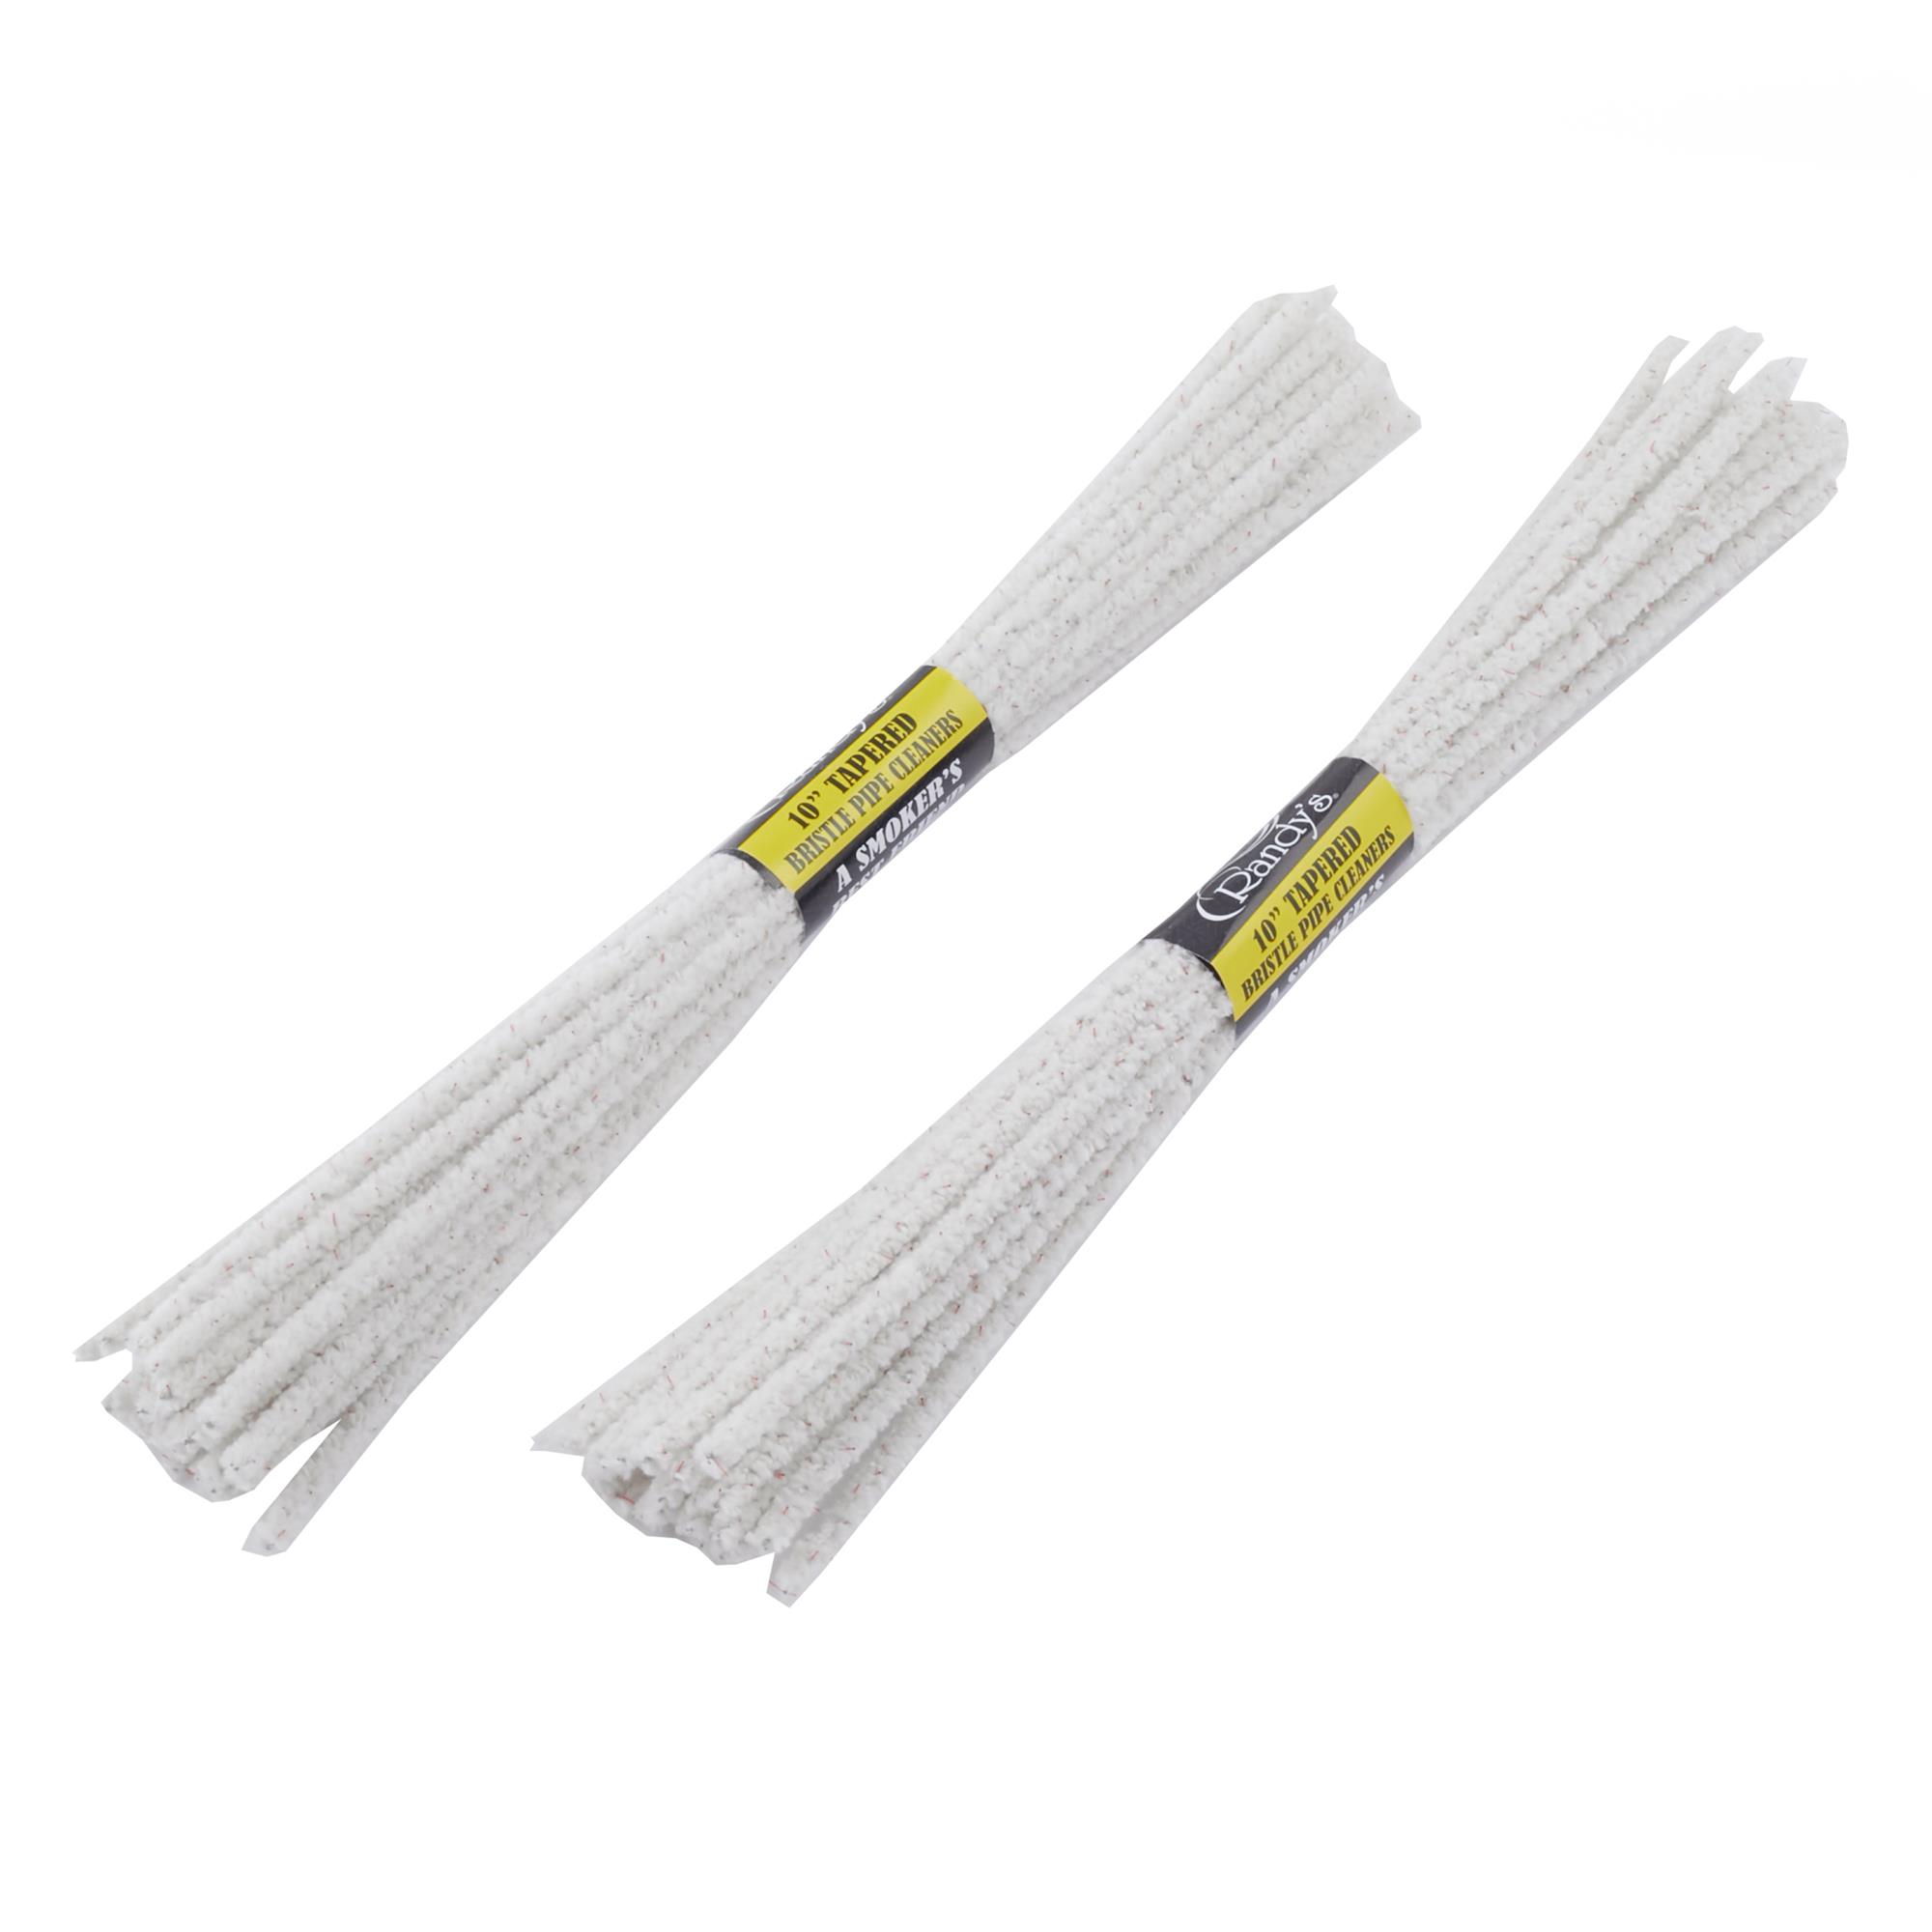 RANDYS BRISTLE XL PIPE CLEANERS